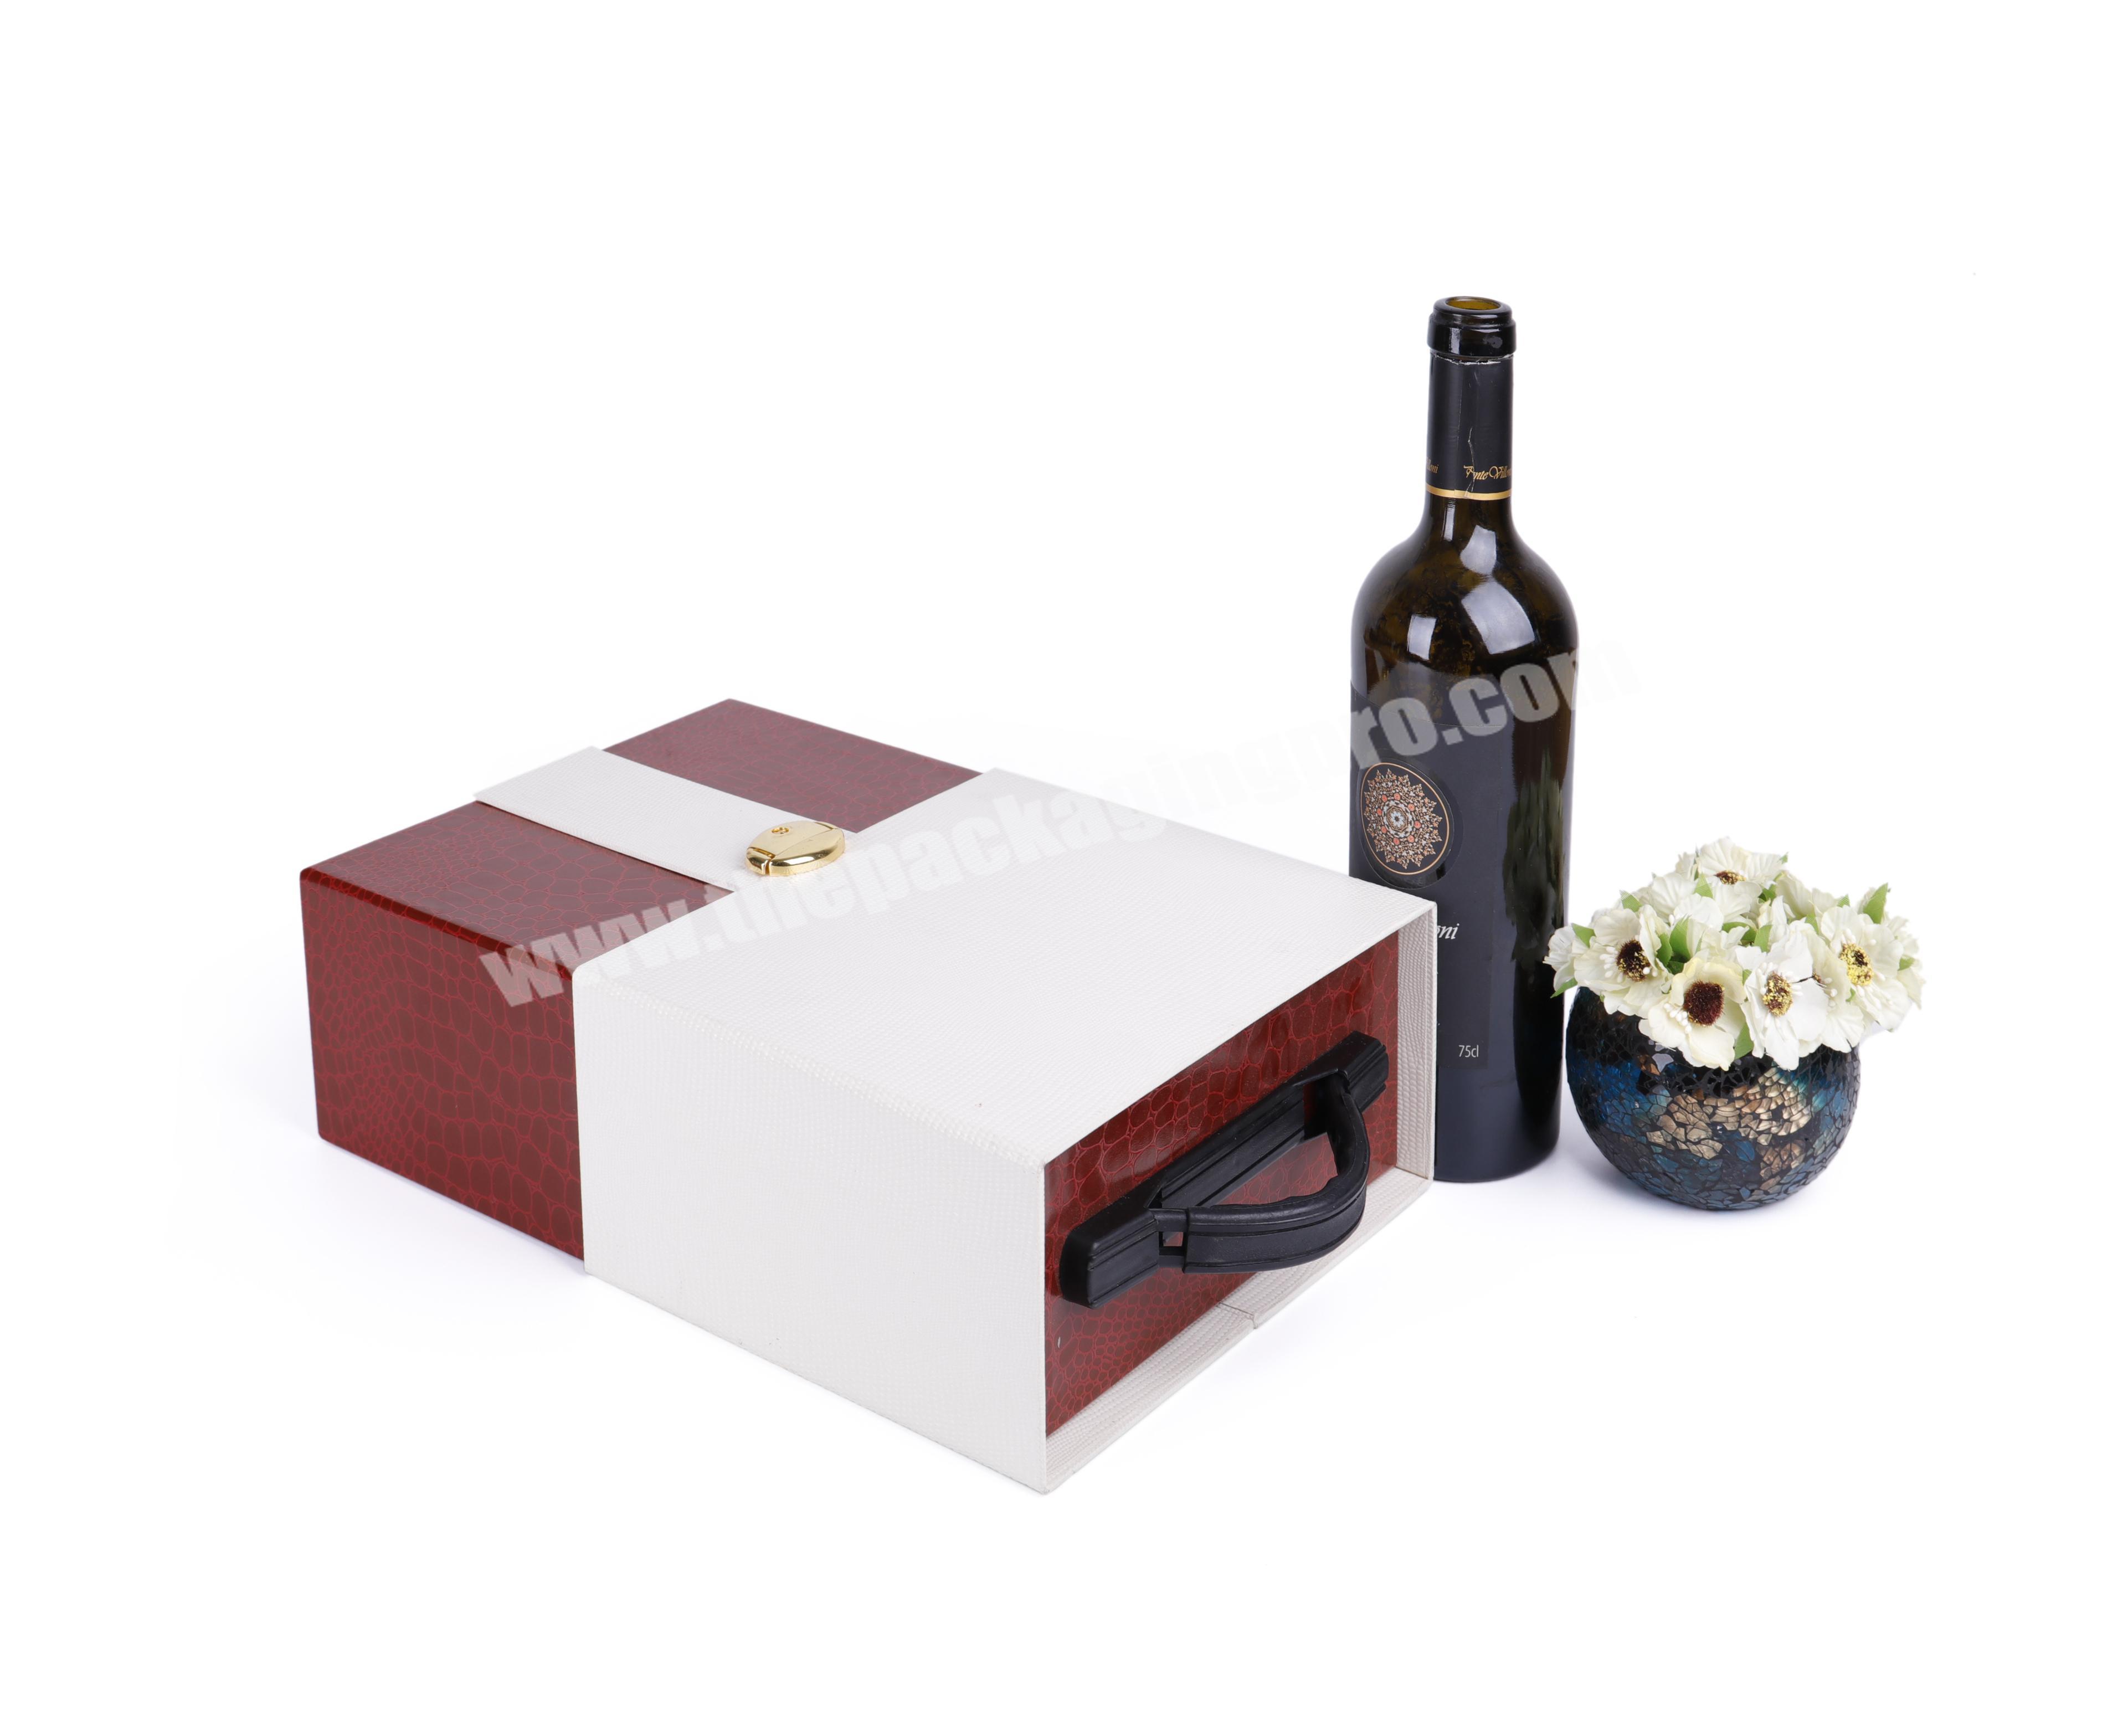 Deluxe PU Leather Box Packaging Automatic Bottle Opener Wine Accessories Gift Set